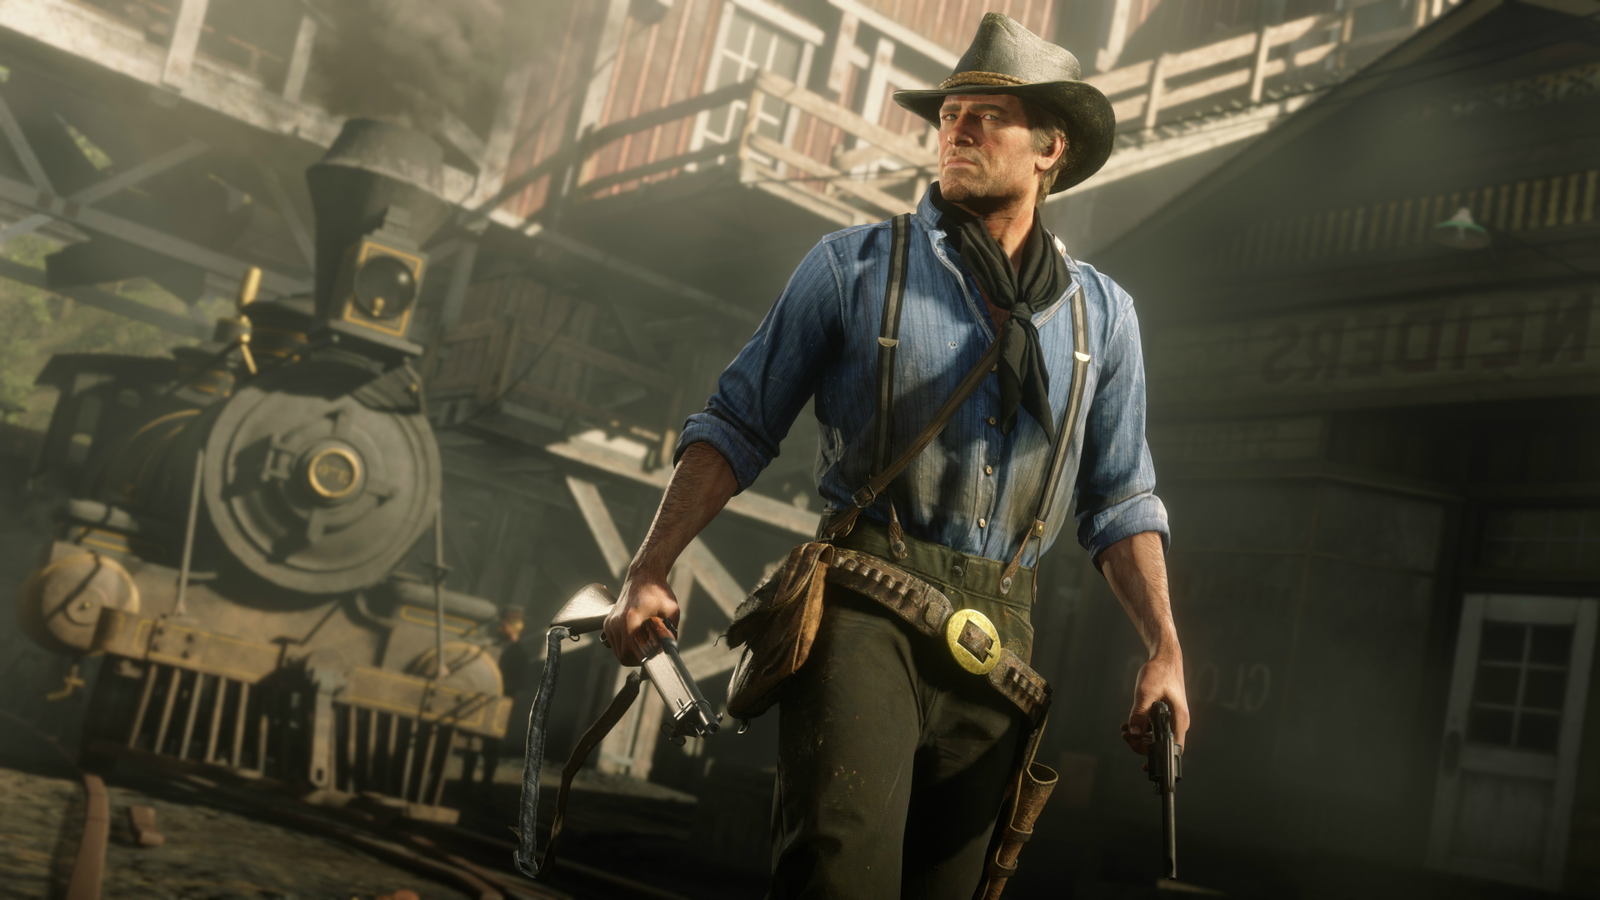 Source code suggests Red Dead Redemption 2 PC port is on the way